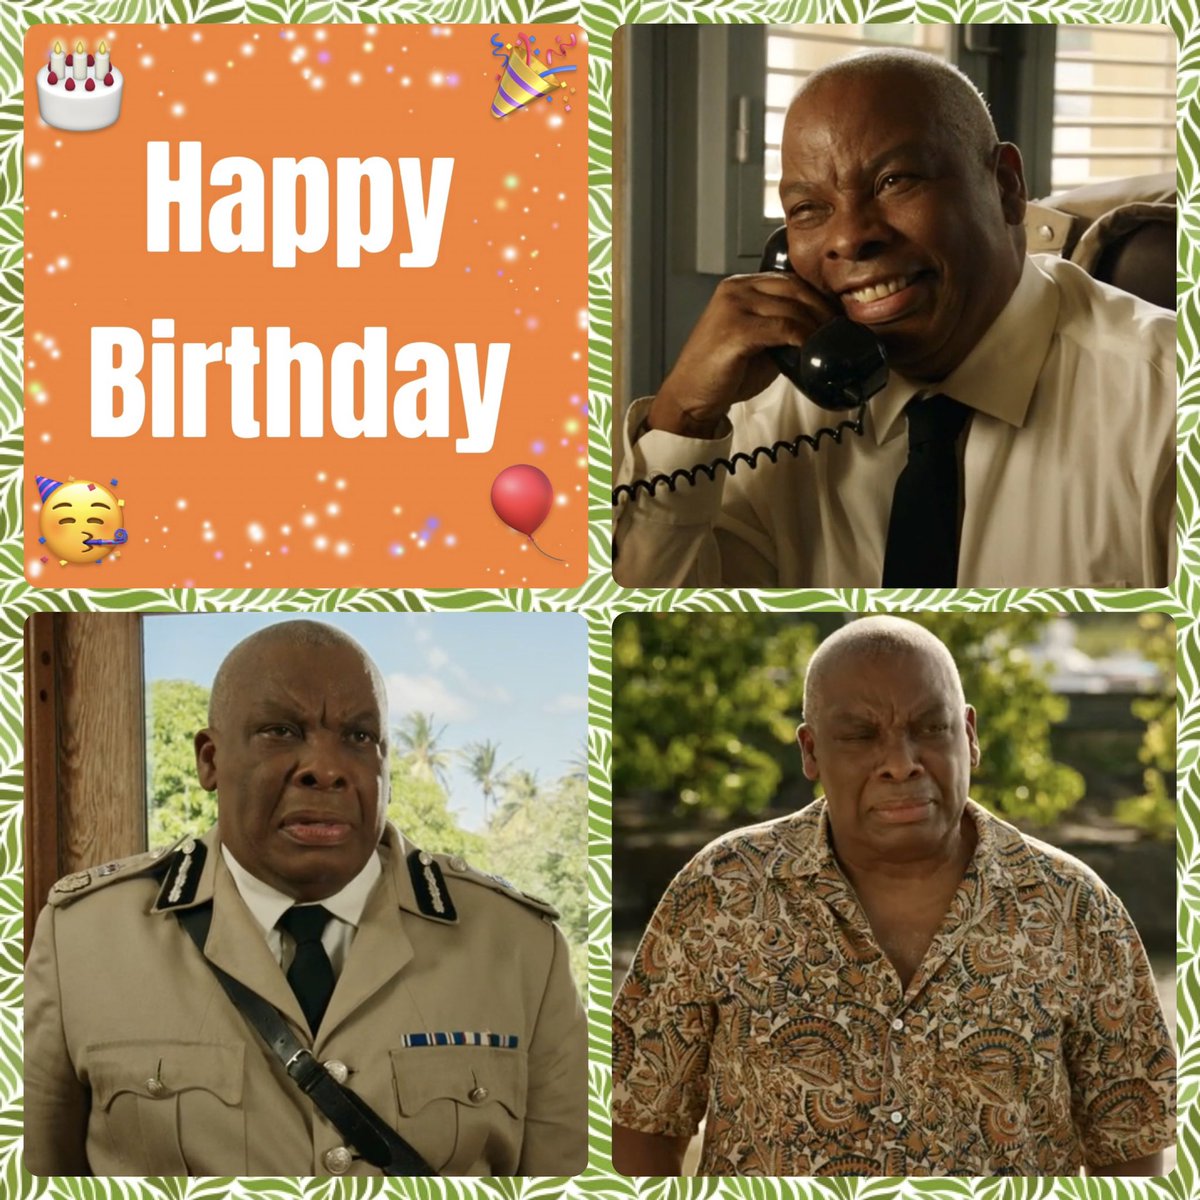 A big Happy Birthday to @Don_warrington a.k.a. Commissioner Selwyn Patterson. Wishing him the best of days! 🥳🎂🎈🎉

#deathinparadise #DonWarrington